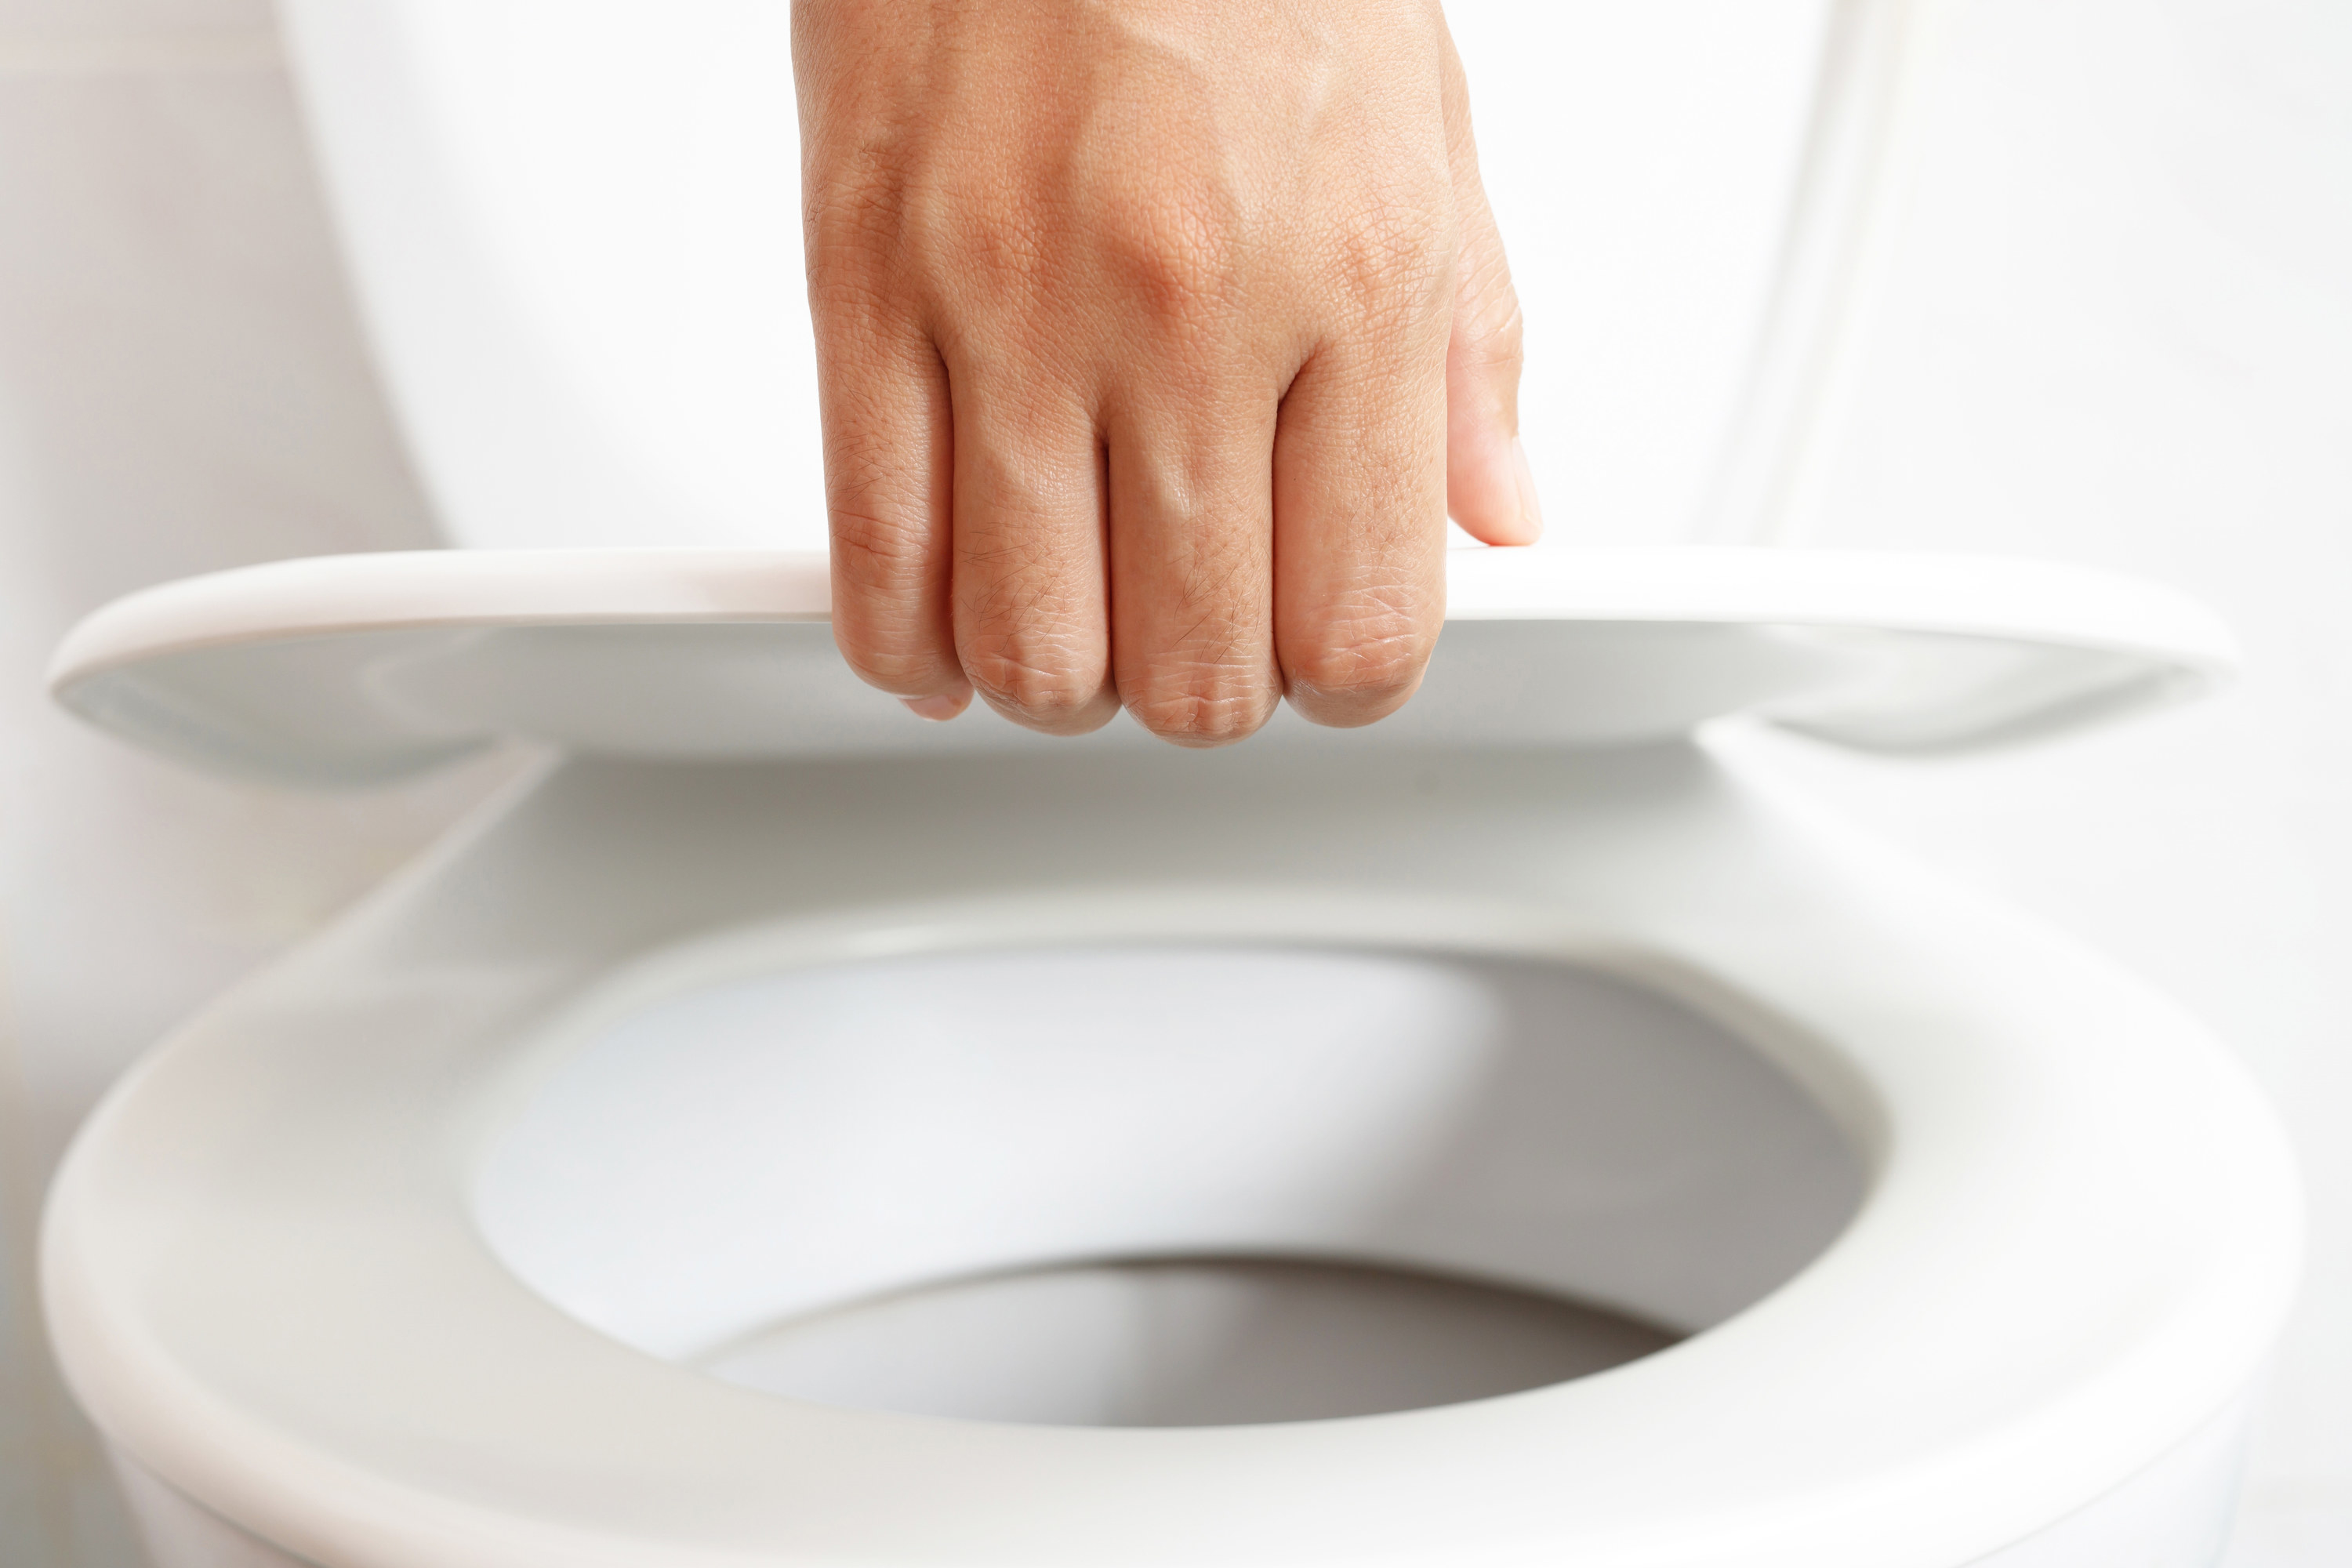 A hand raising a toilet seat cover